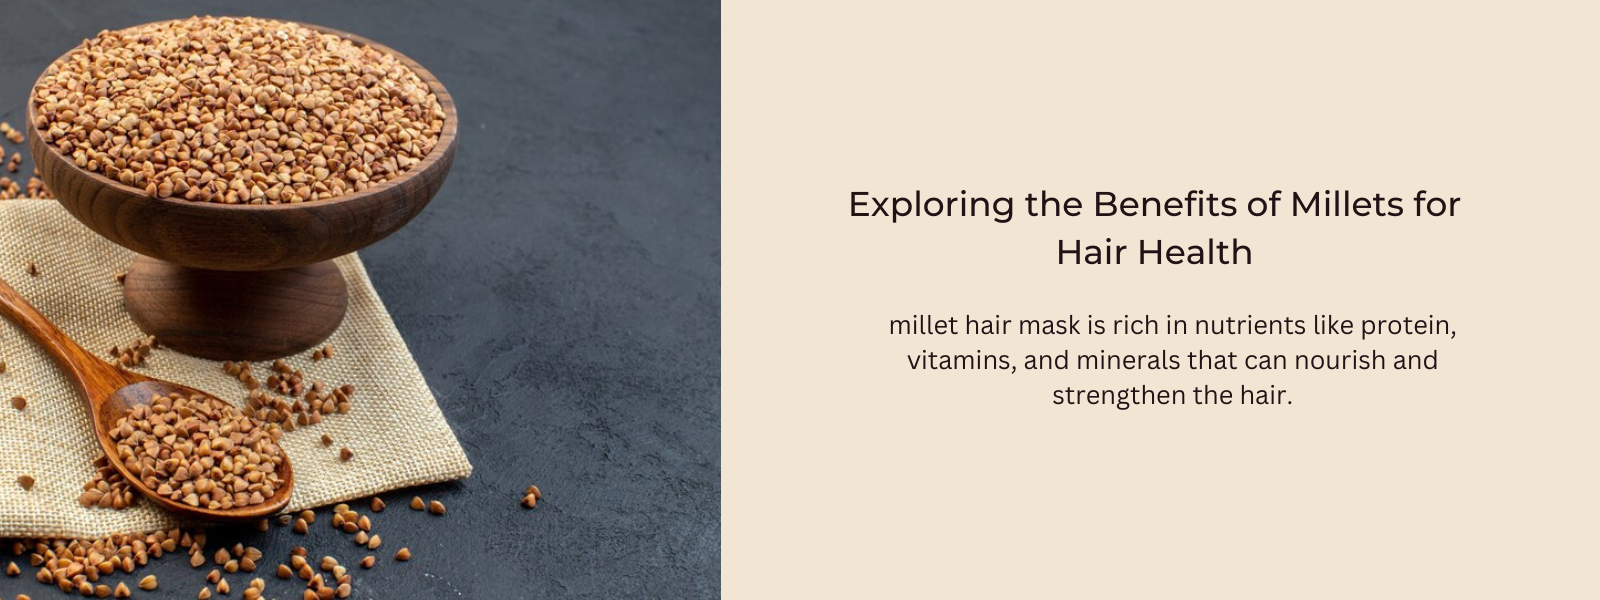 Exploring the Benefits of Millets for Hair Health